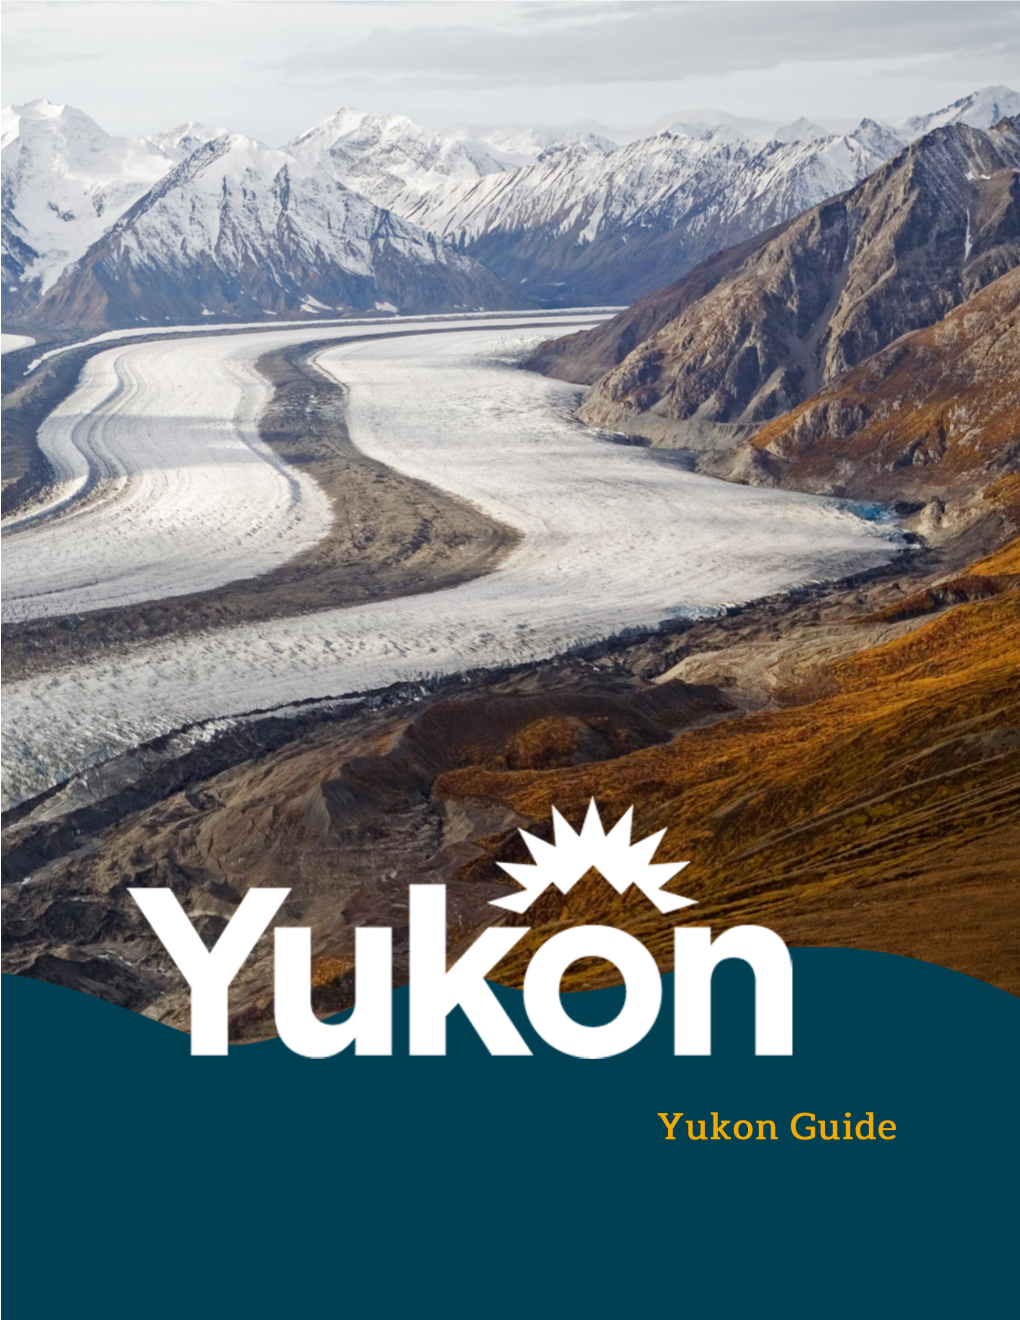 Population As of 2019 There Were 41,352 People Living in Yukon